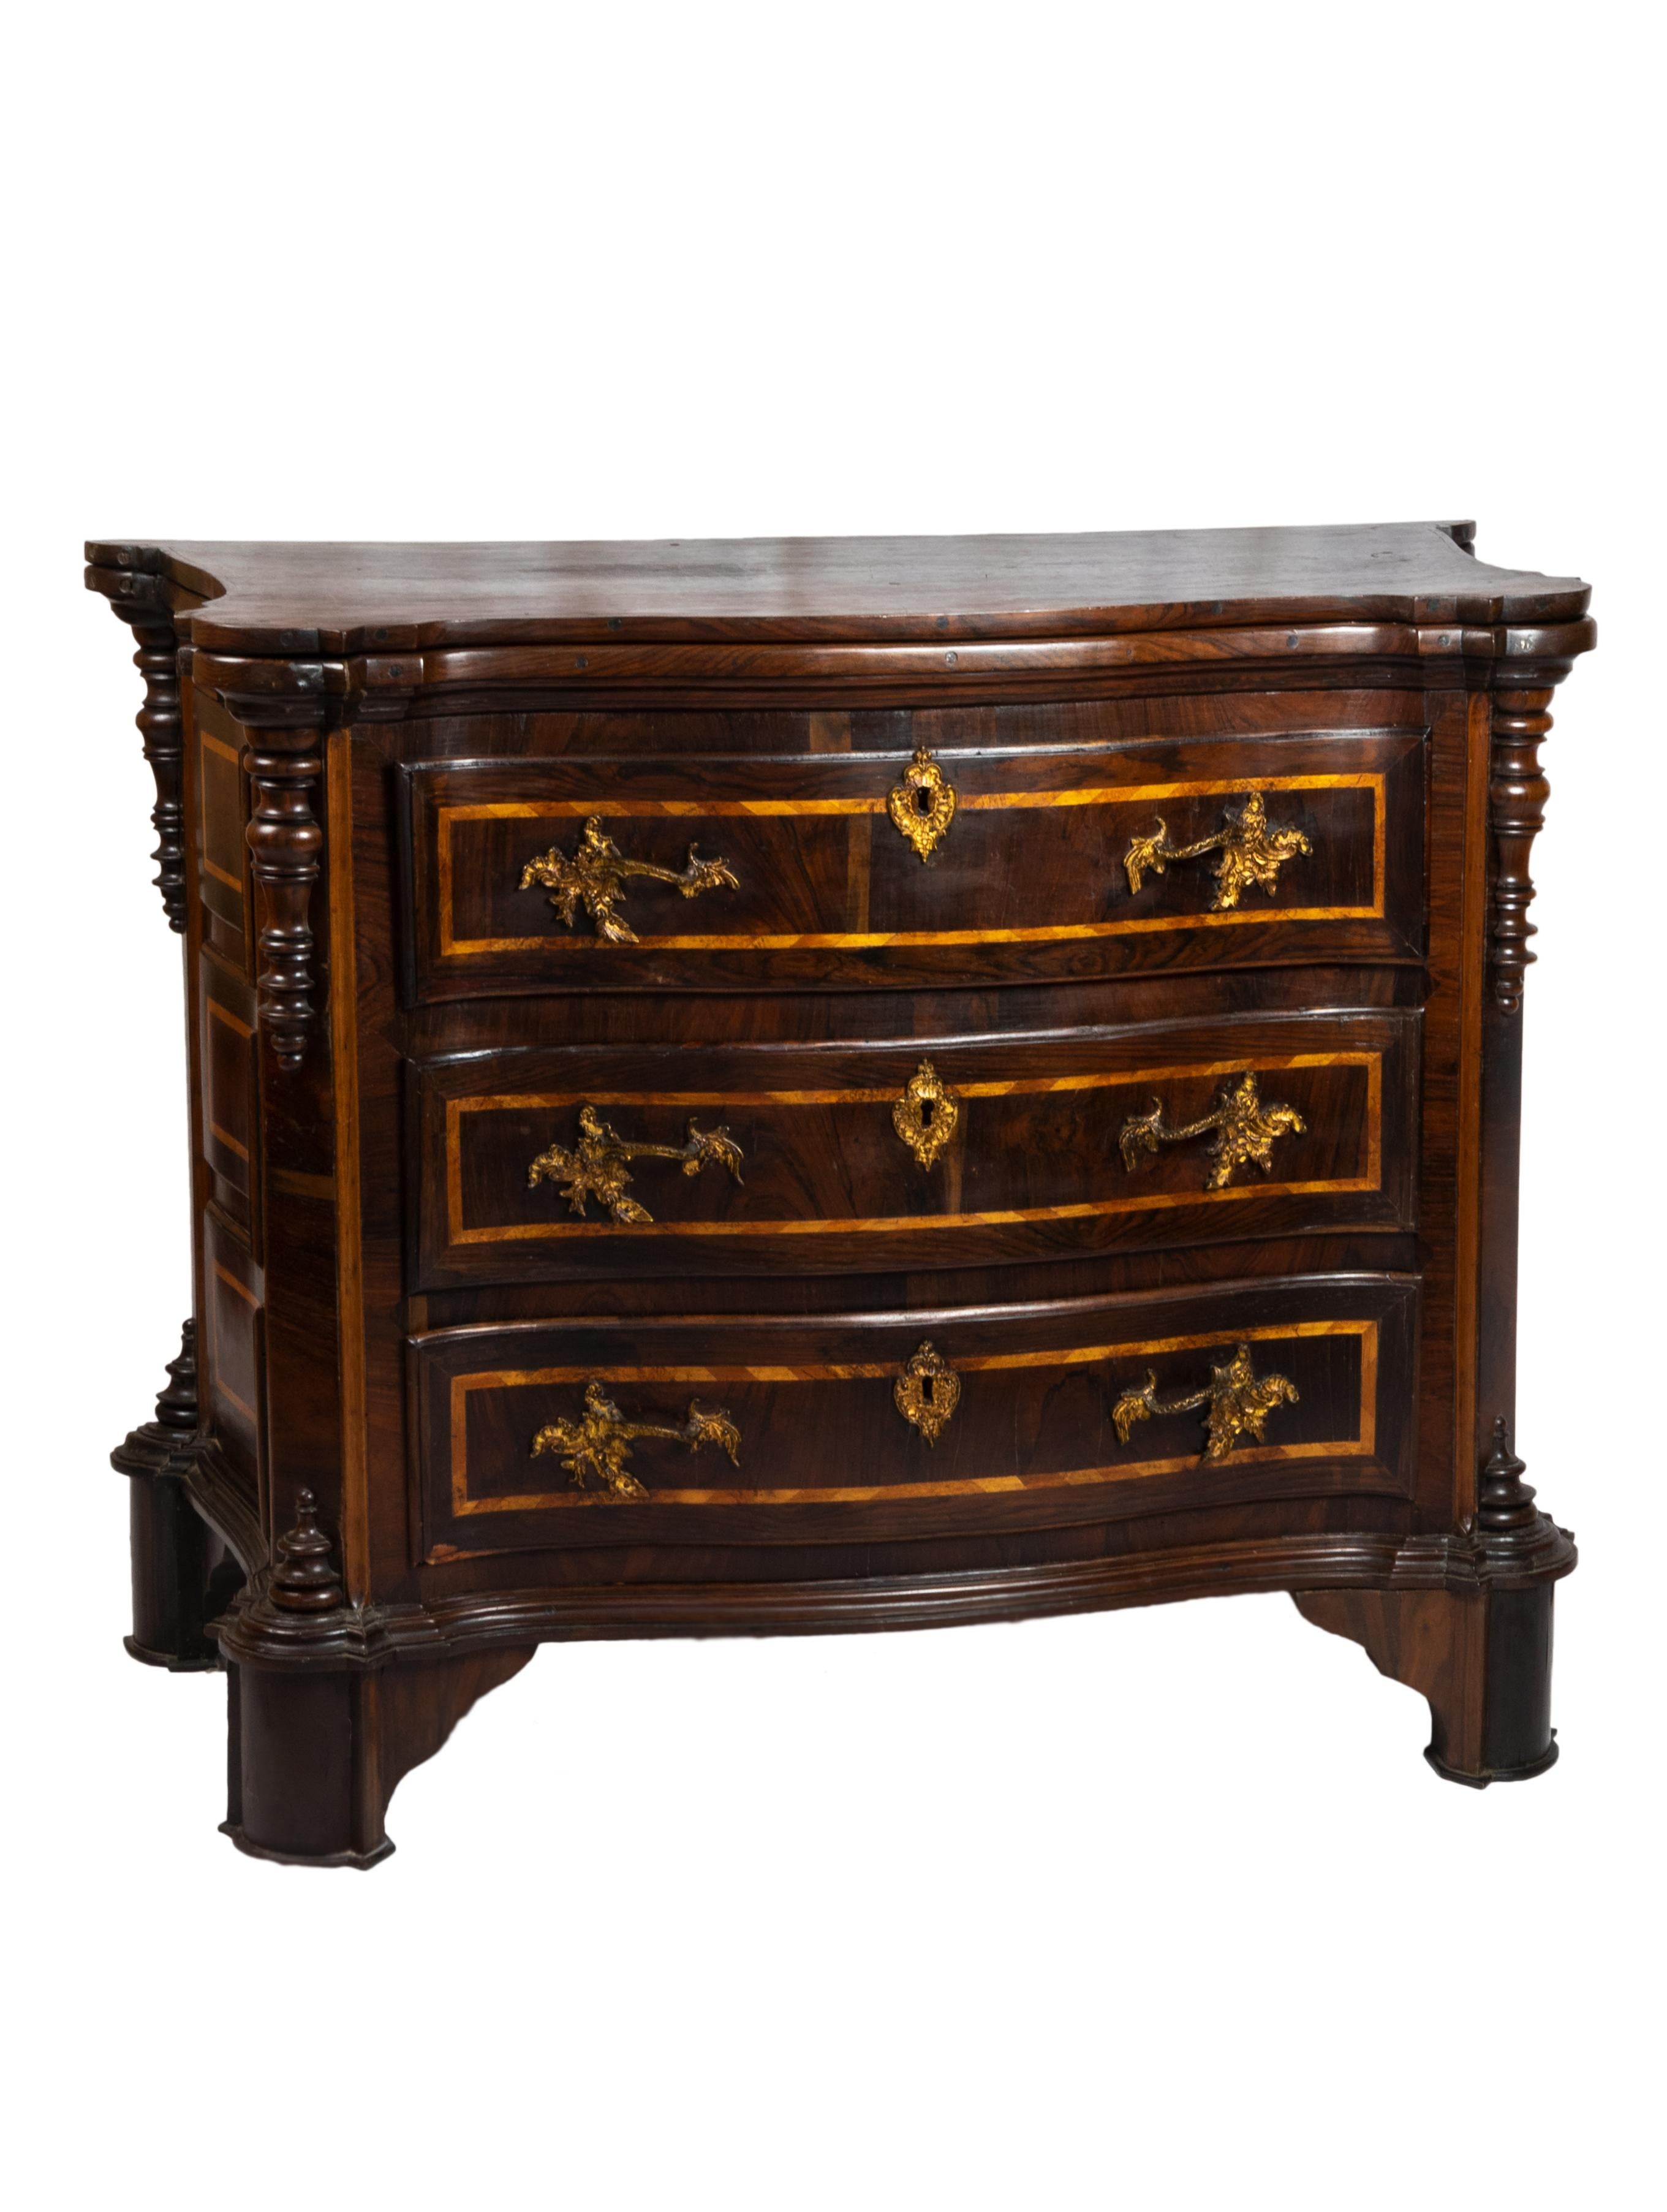 An unique specimen, a very rare chest of drawers of the early Portuguese Baroque with double top convertible into a table, 3 drawers, gilded bronze letterhead and handles, of Italian influence, an example in excellent condition of the style that 